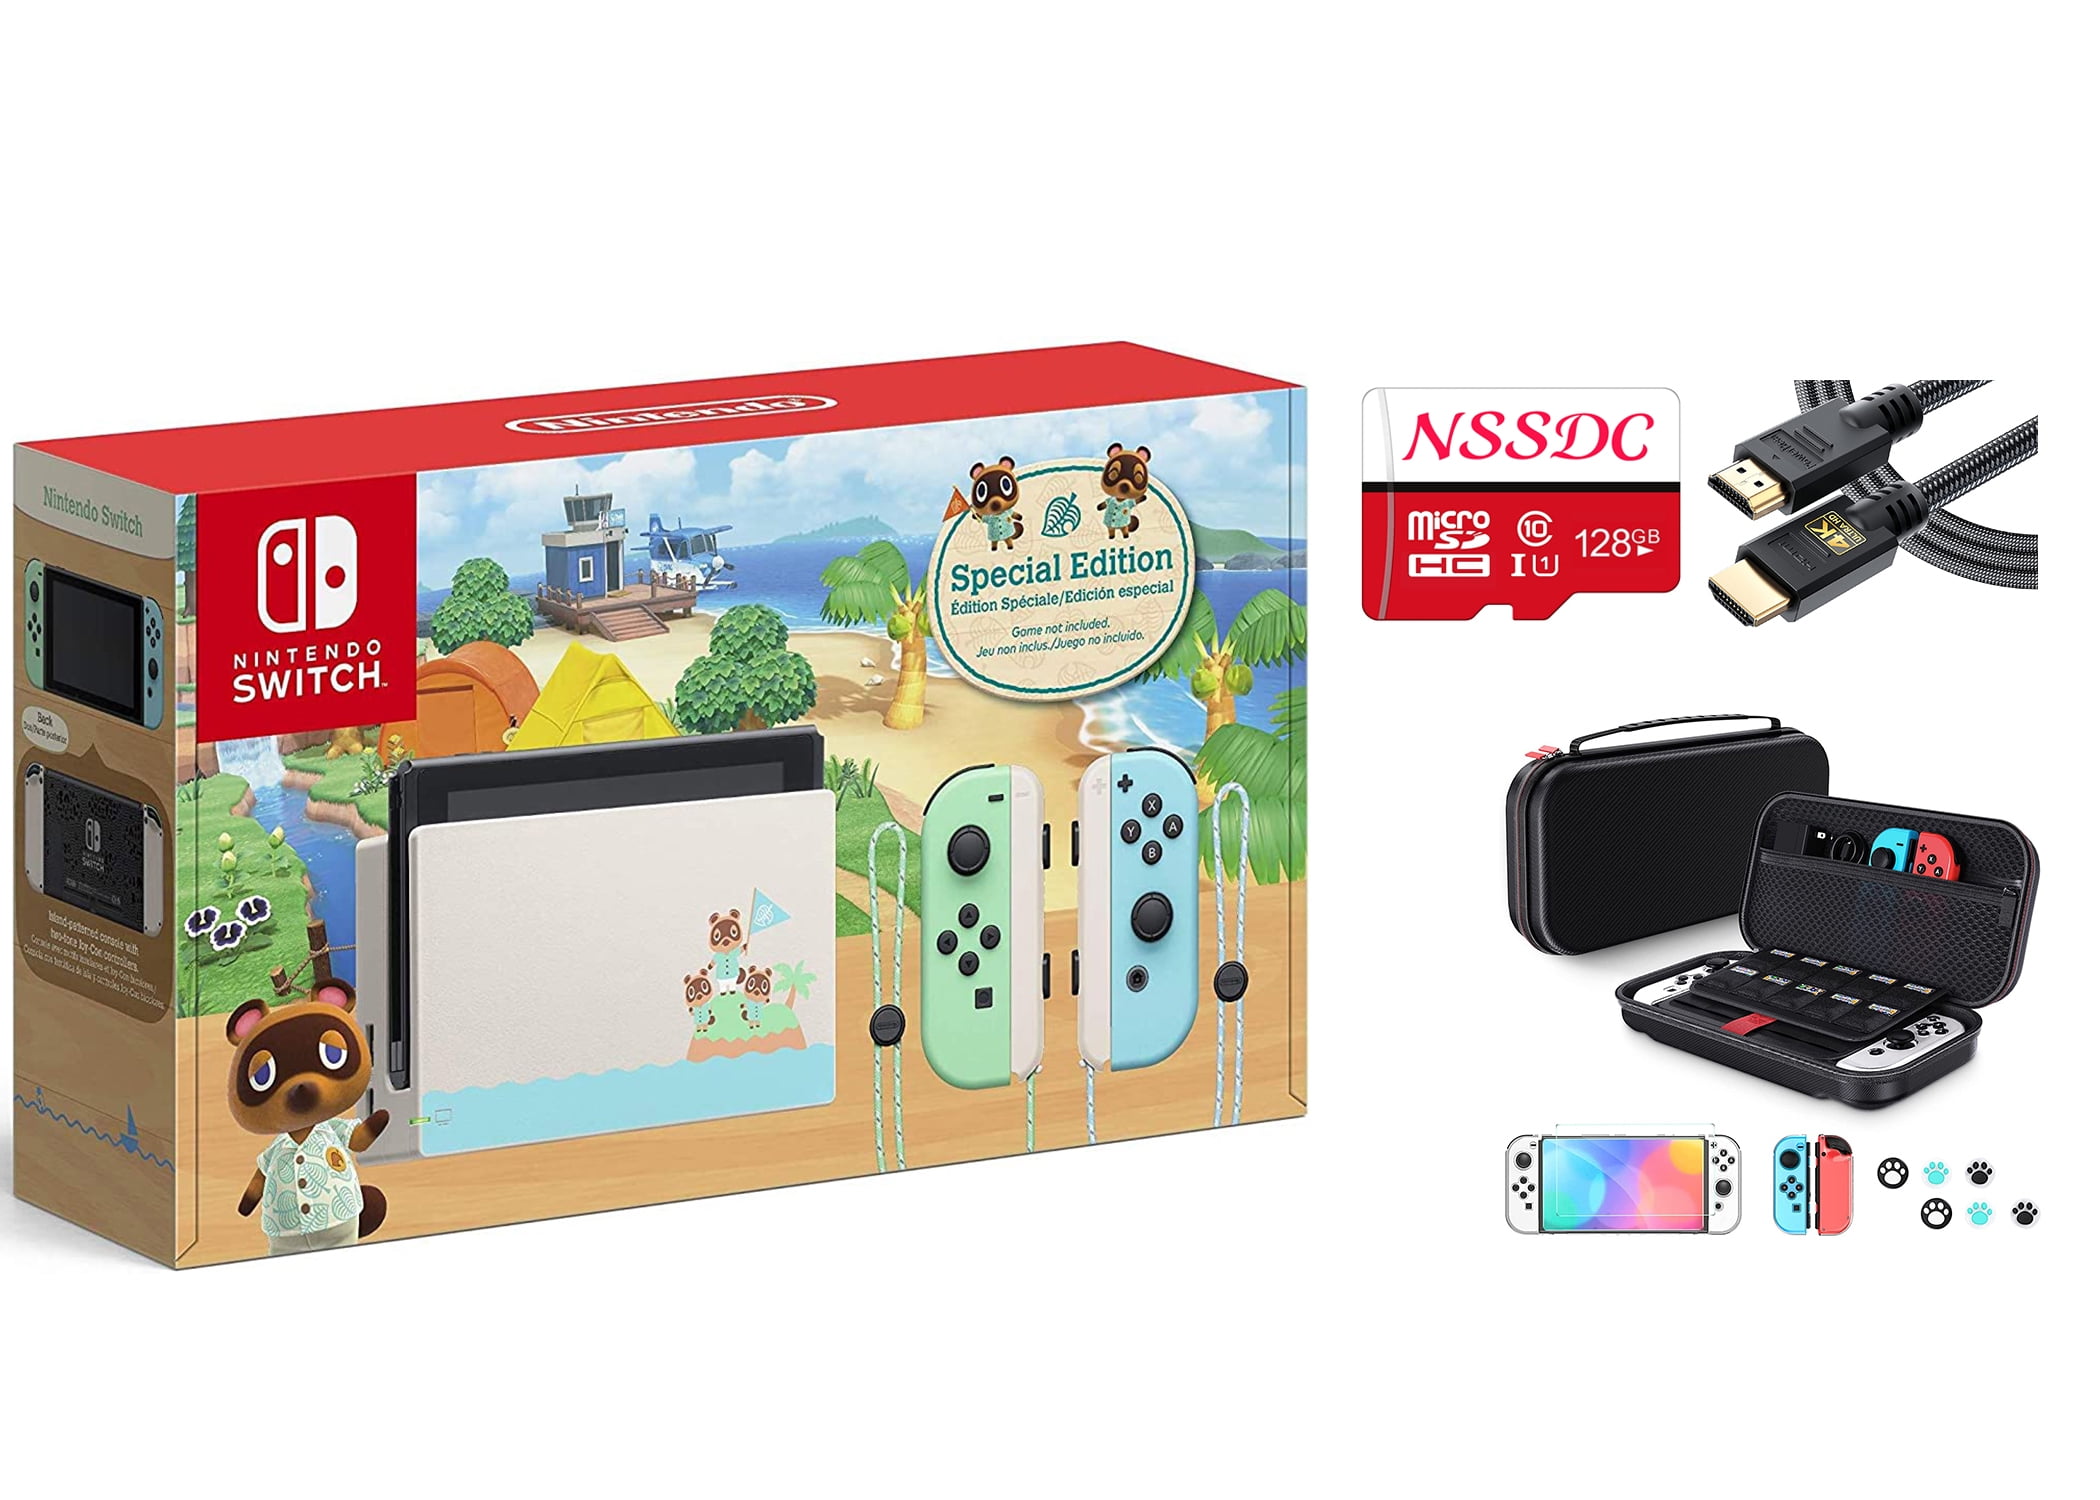 Nintendo Switch Bundle: Nintendo Switch Animal Crossing New Horizons Edition 32GB Console with NSSDC 128GB SD Card, HDMI cable, Nintendo Switch Accessories Portable Travel Carrying - Walmart.com